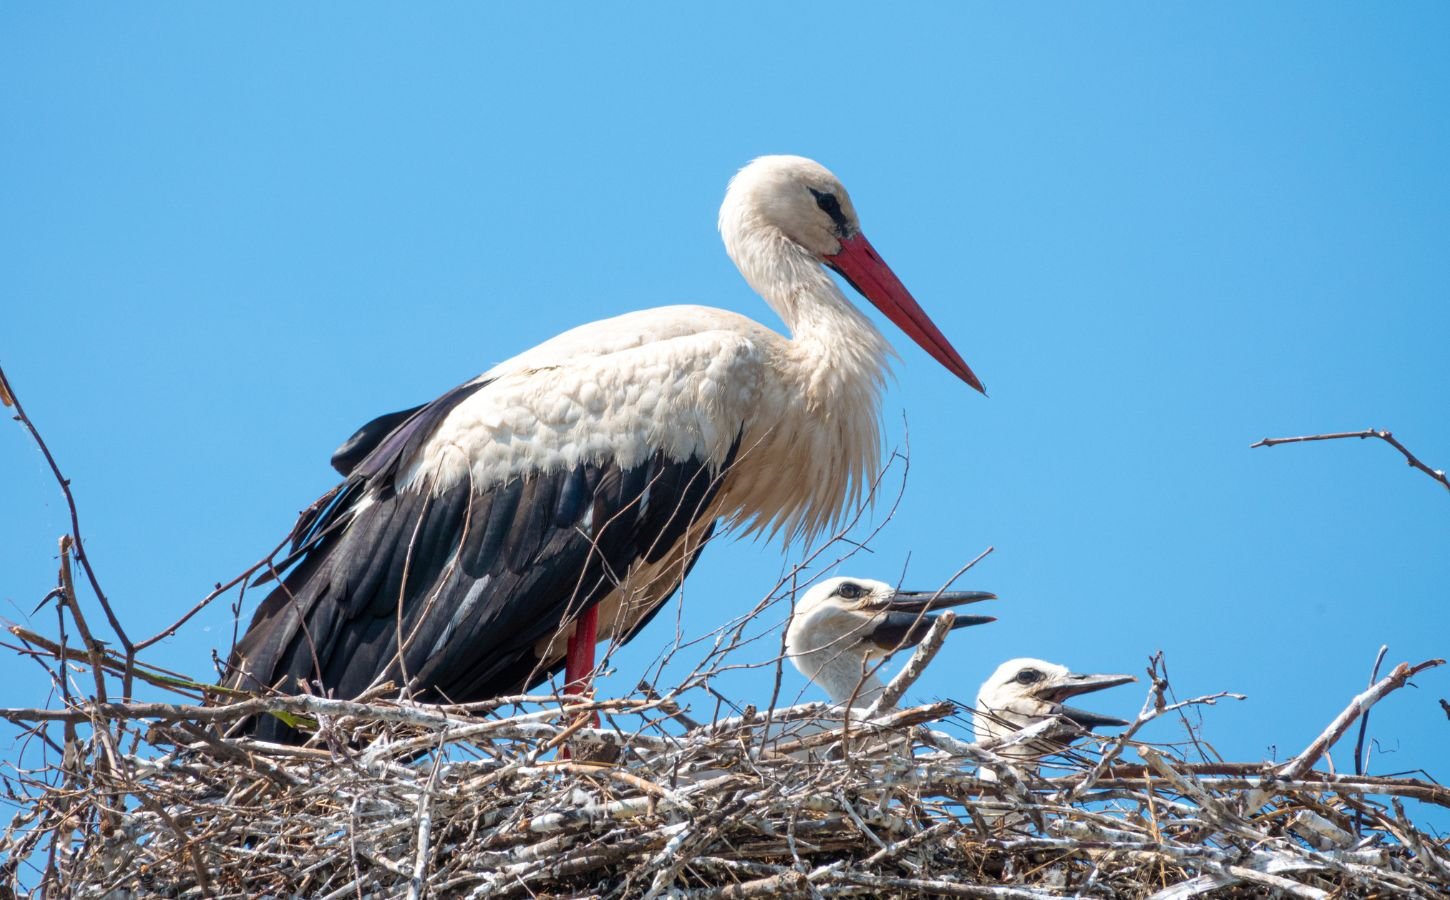 Photo shows an adult stork and two chicks inside a large nest